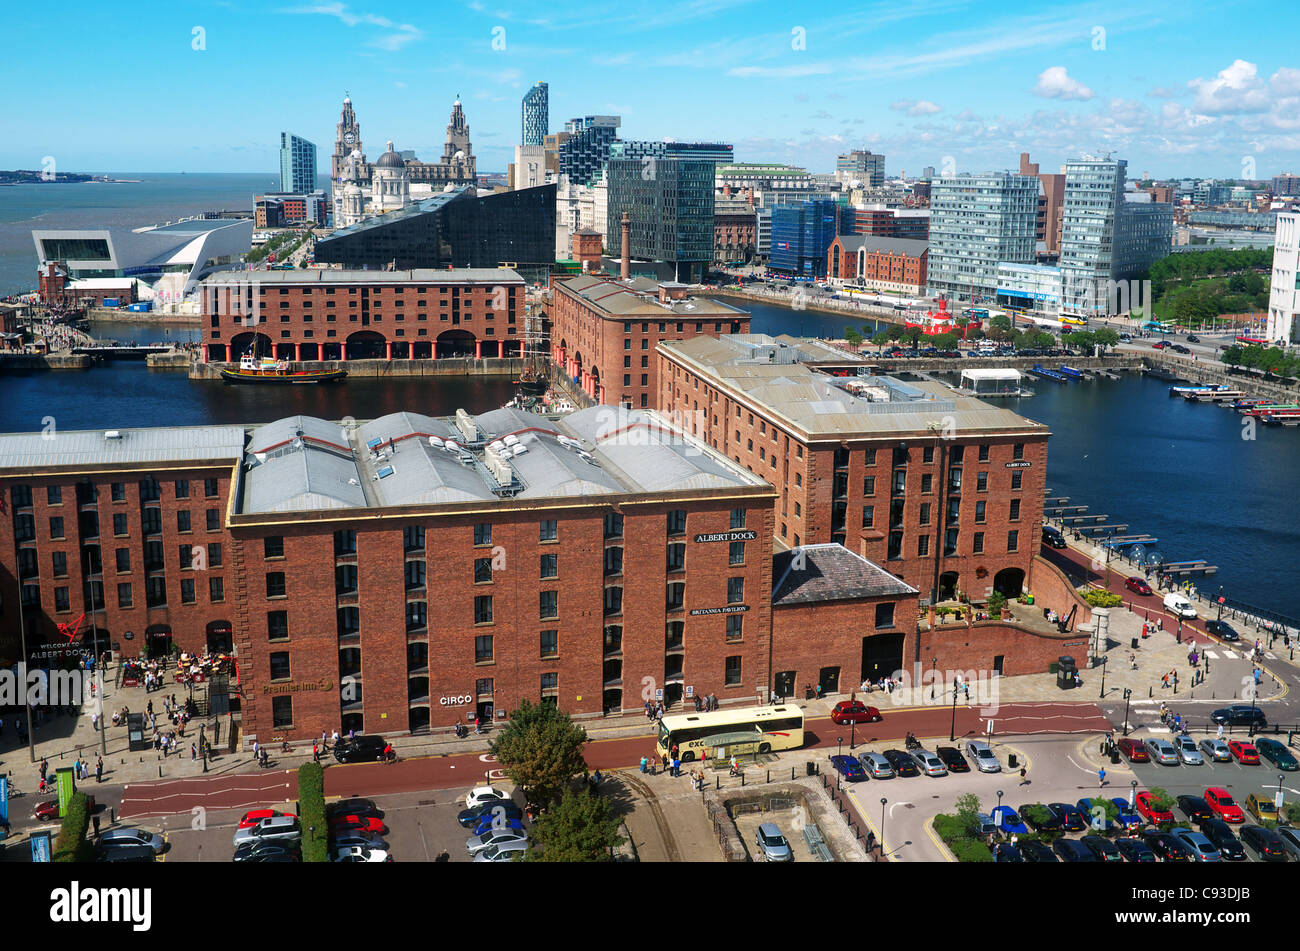 Albert Docks, The River Mersey, Liverpool Docklands and a view across the skyline to the Liver Building, Liverpool Stock Photo